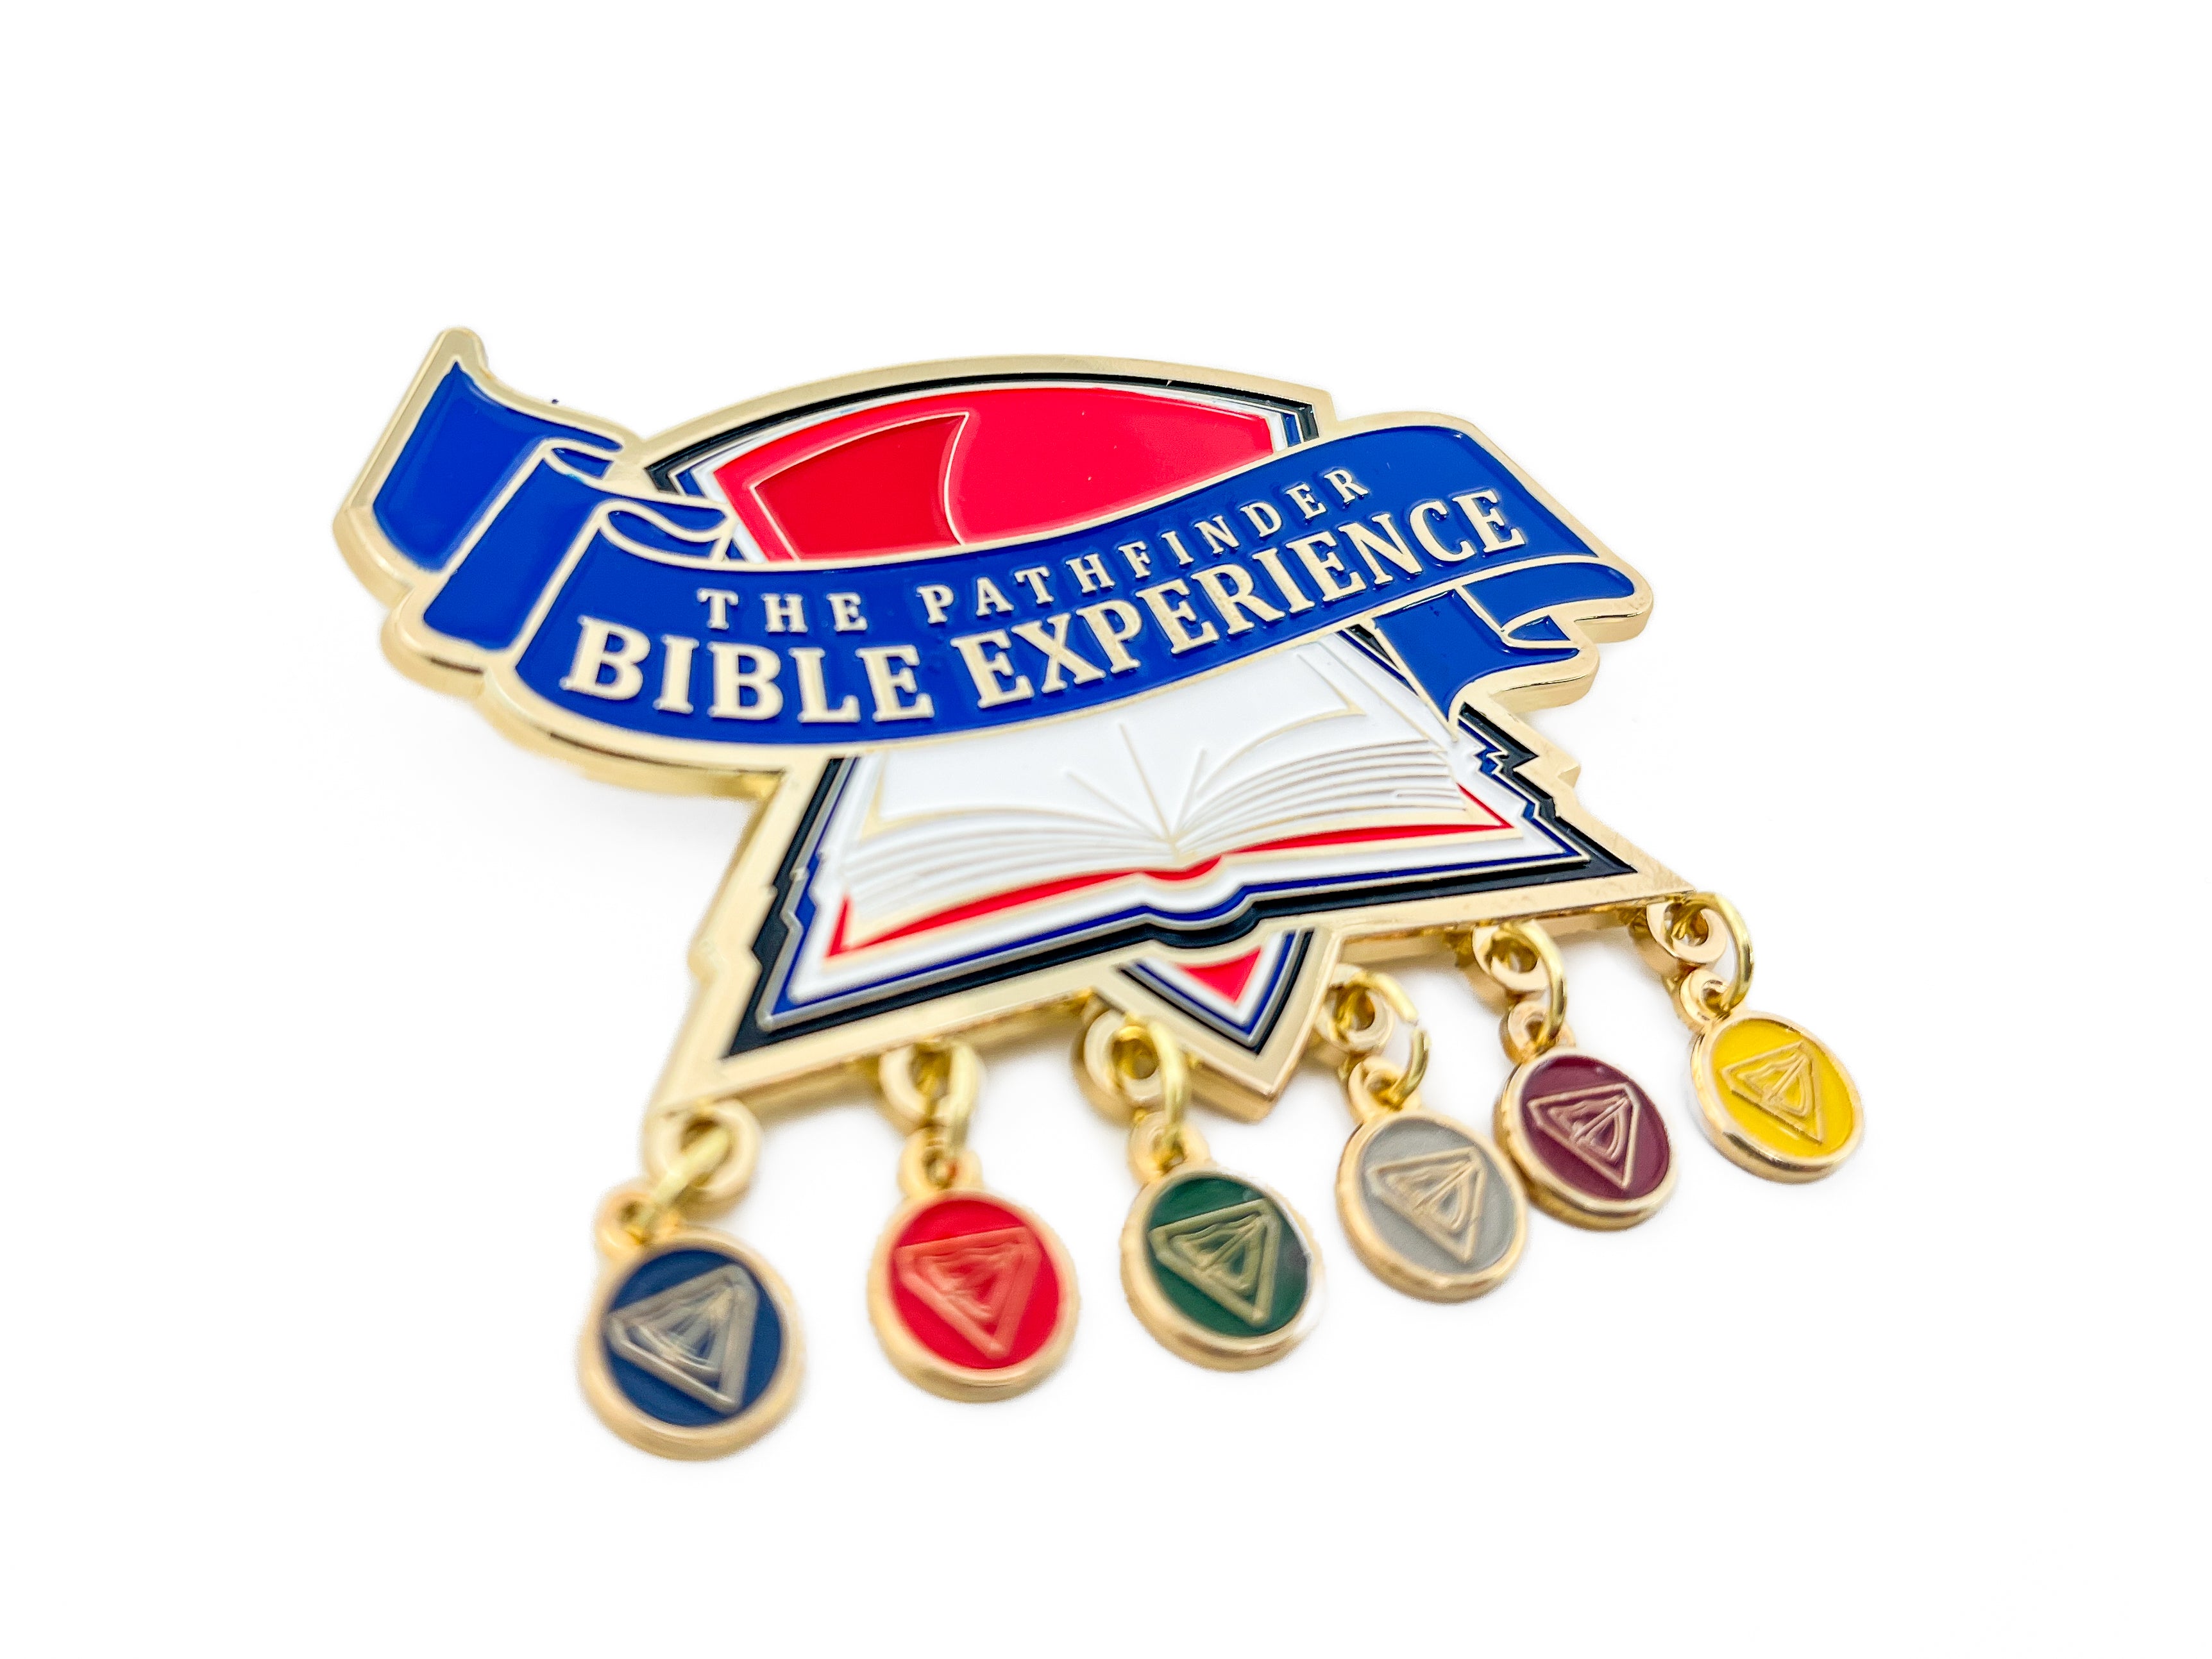 Pathfinder Bible Experience Classes Pin